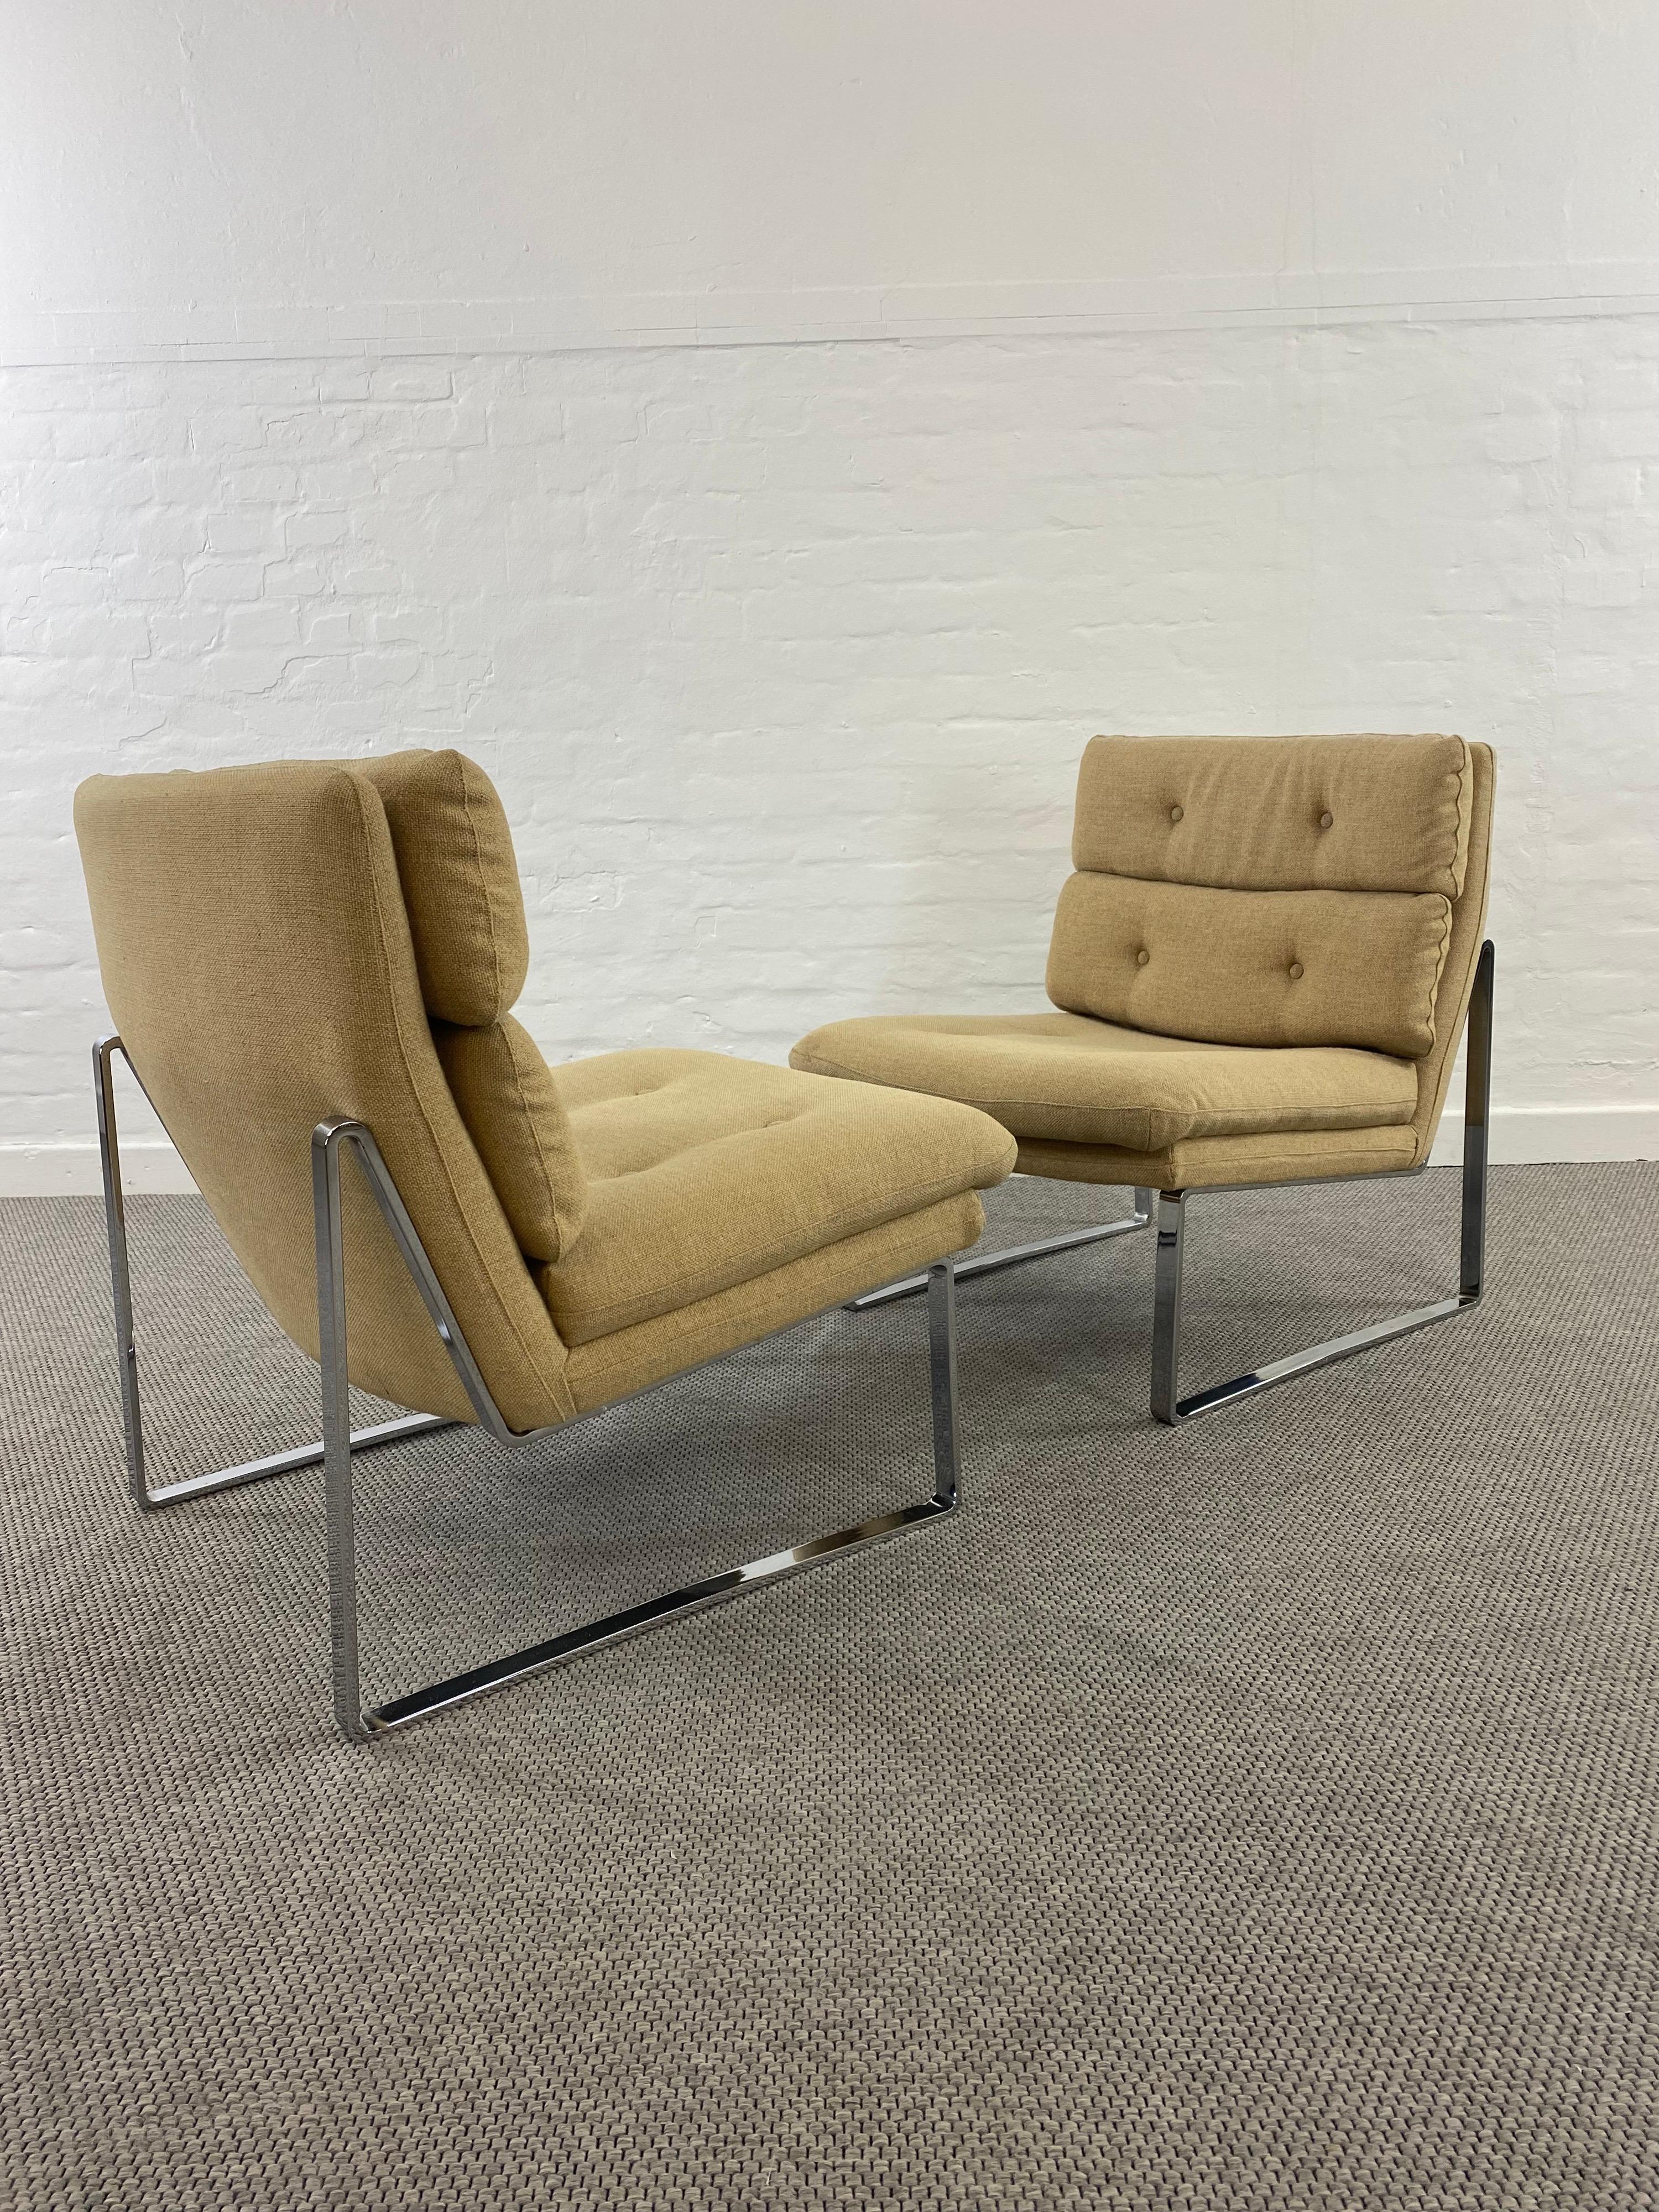 Late 20th Century Pair of Midcentury Steel Cocktail Chair from Miller Borgsen by Röder & Söhne